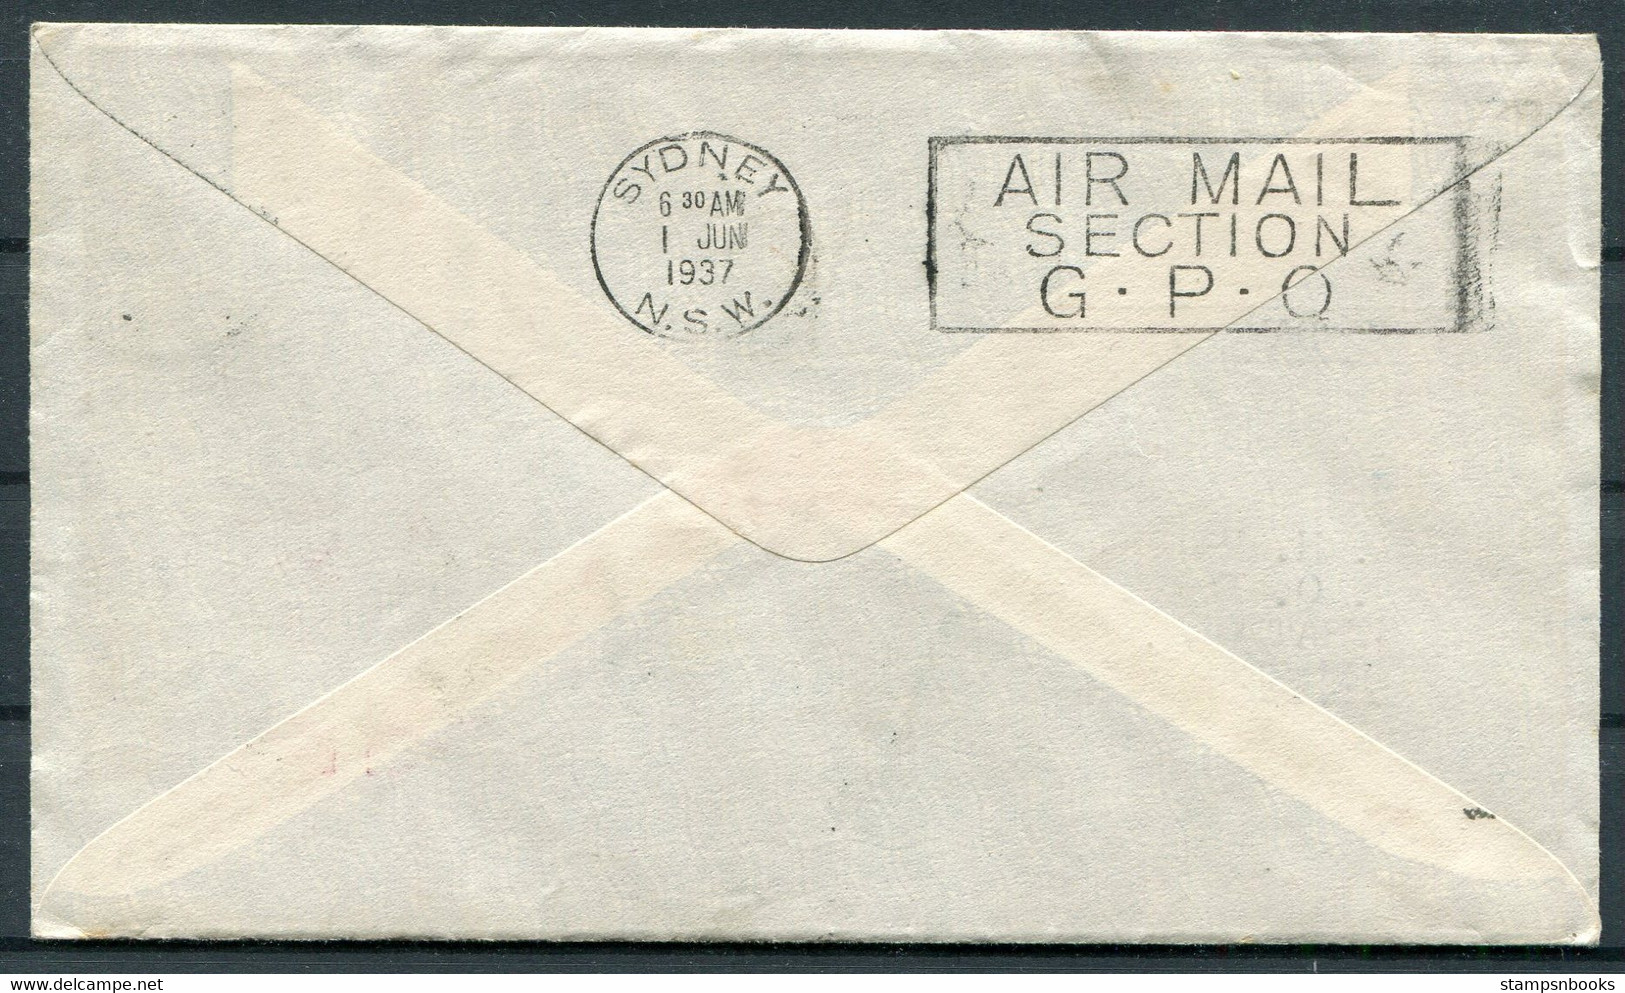 1937 South Africa Coronation First Day Cover, Imperial Airways Flight Benoni - New Zealand Via Sydney Australia Air Mail - Luchtpost